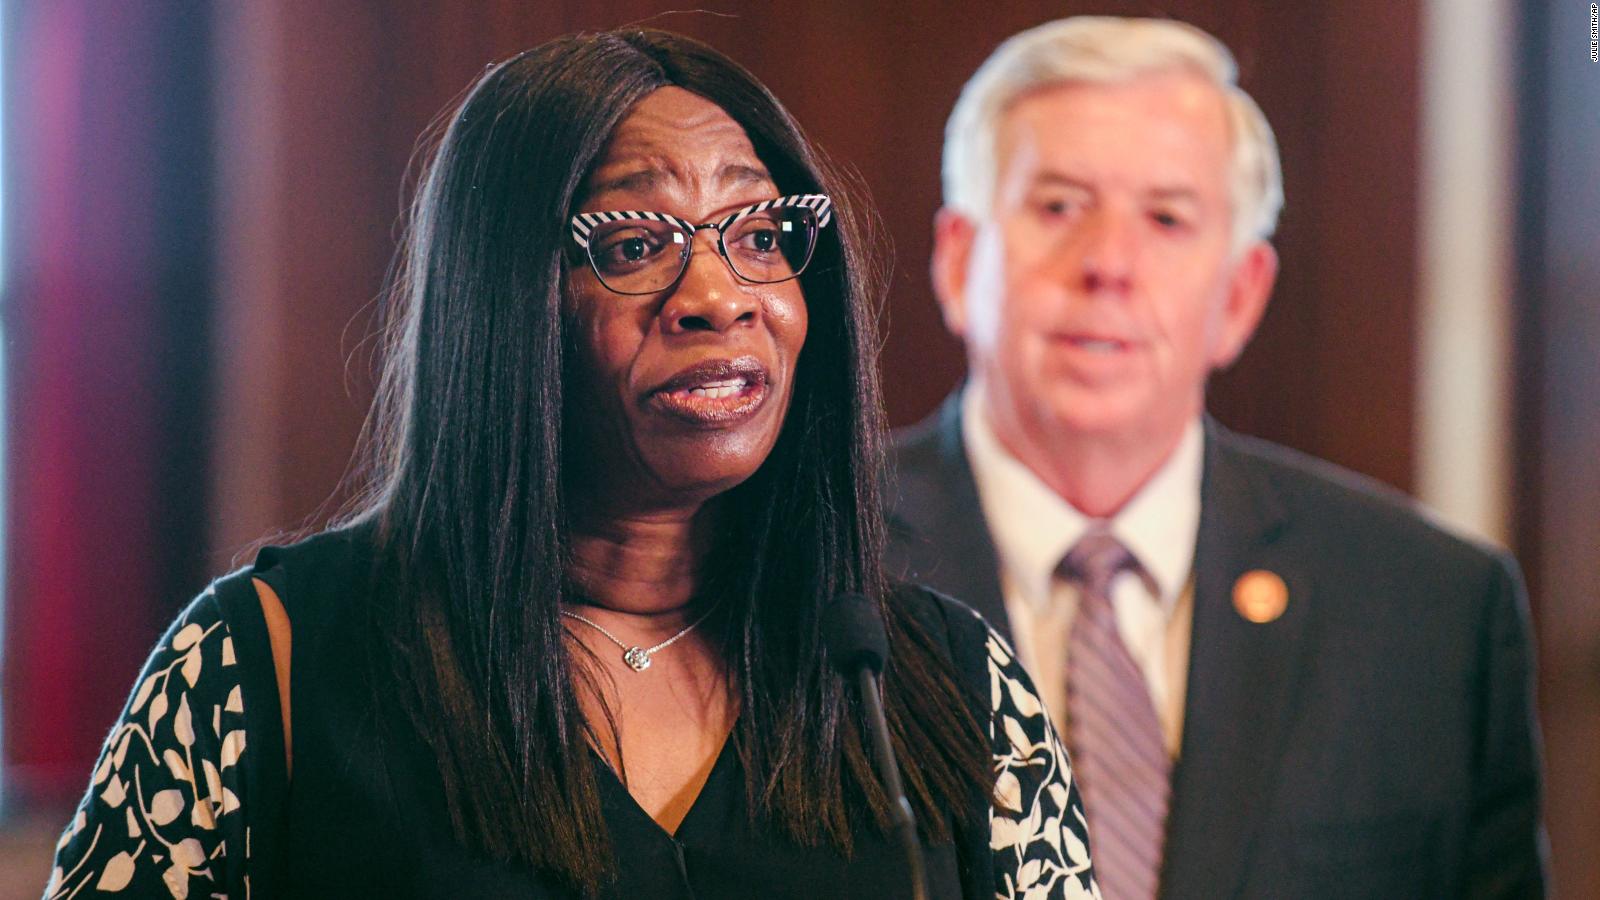 A Black woman will serve on the Missouri Supreme Court for the first